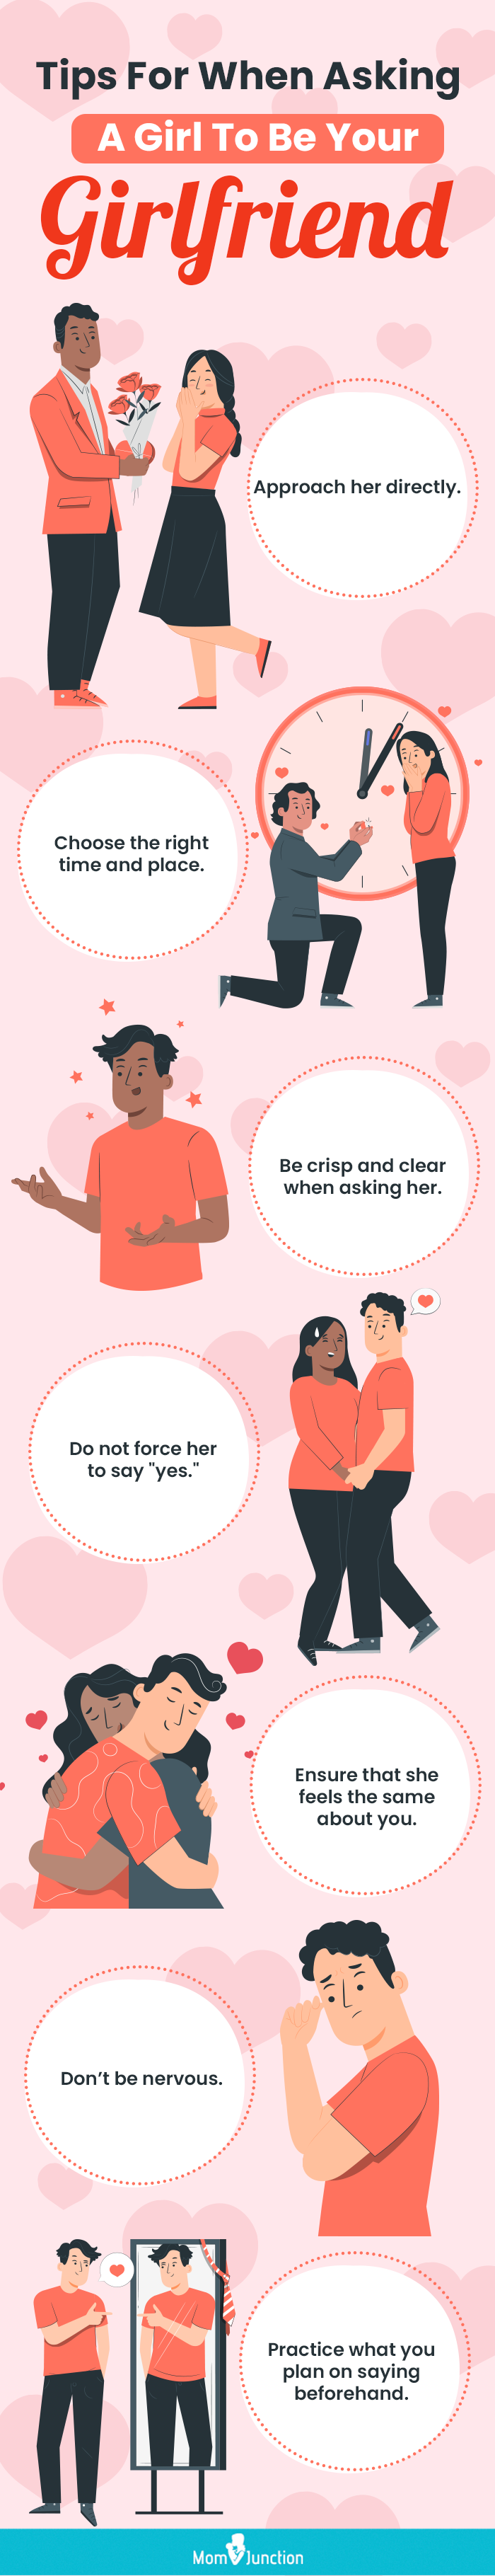 tips for when asking a girl to be your girlfriend [infographic]